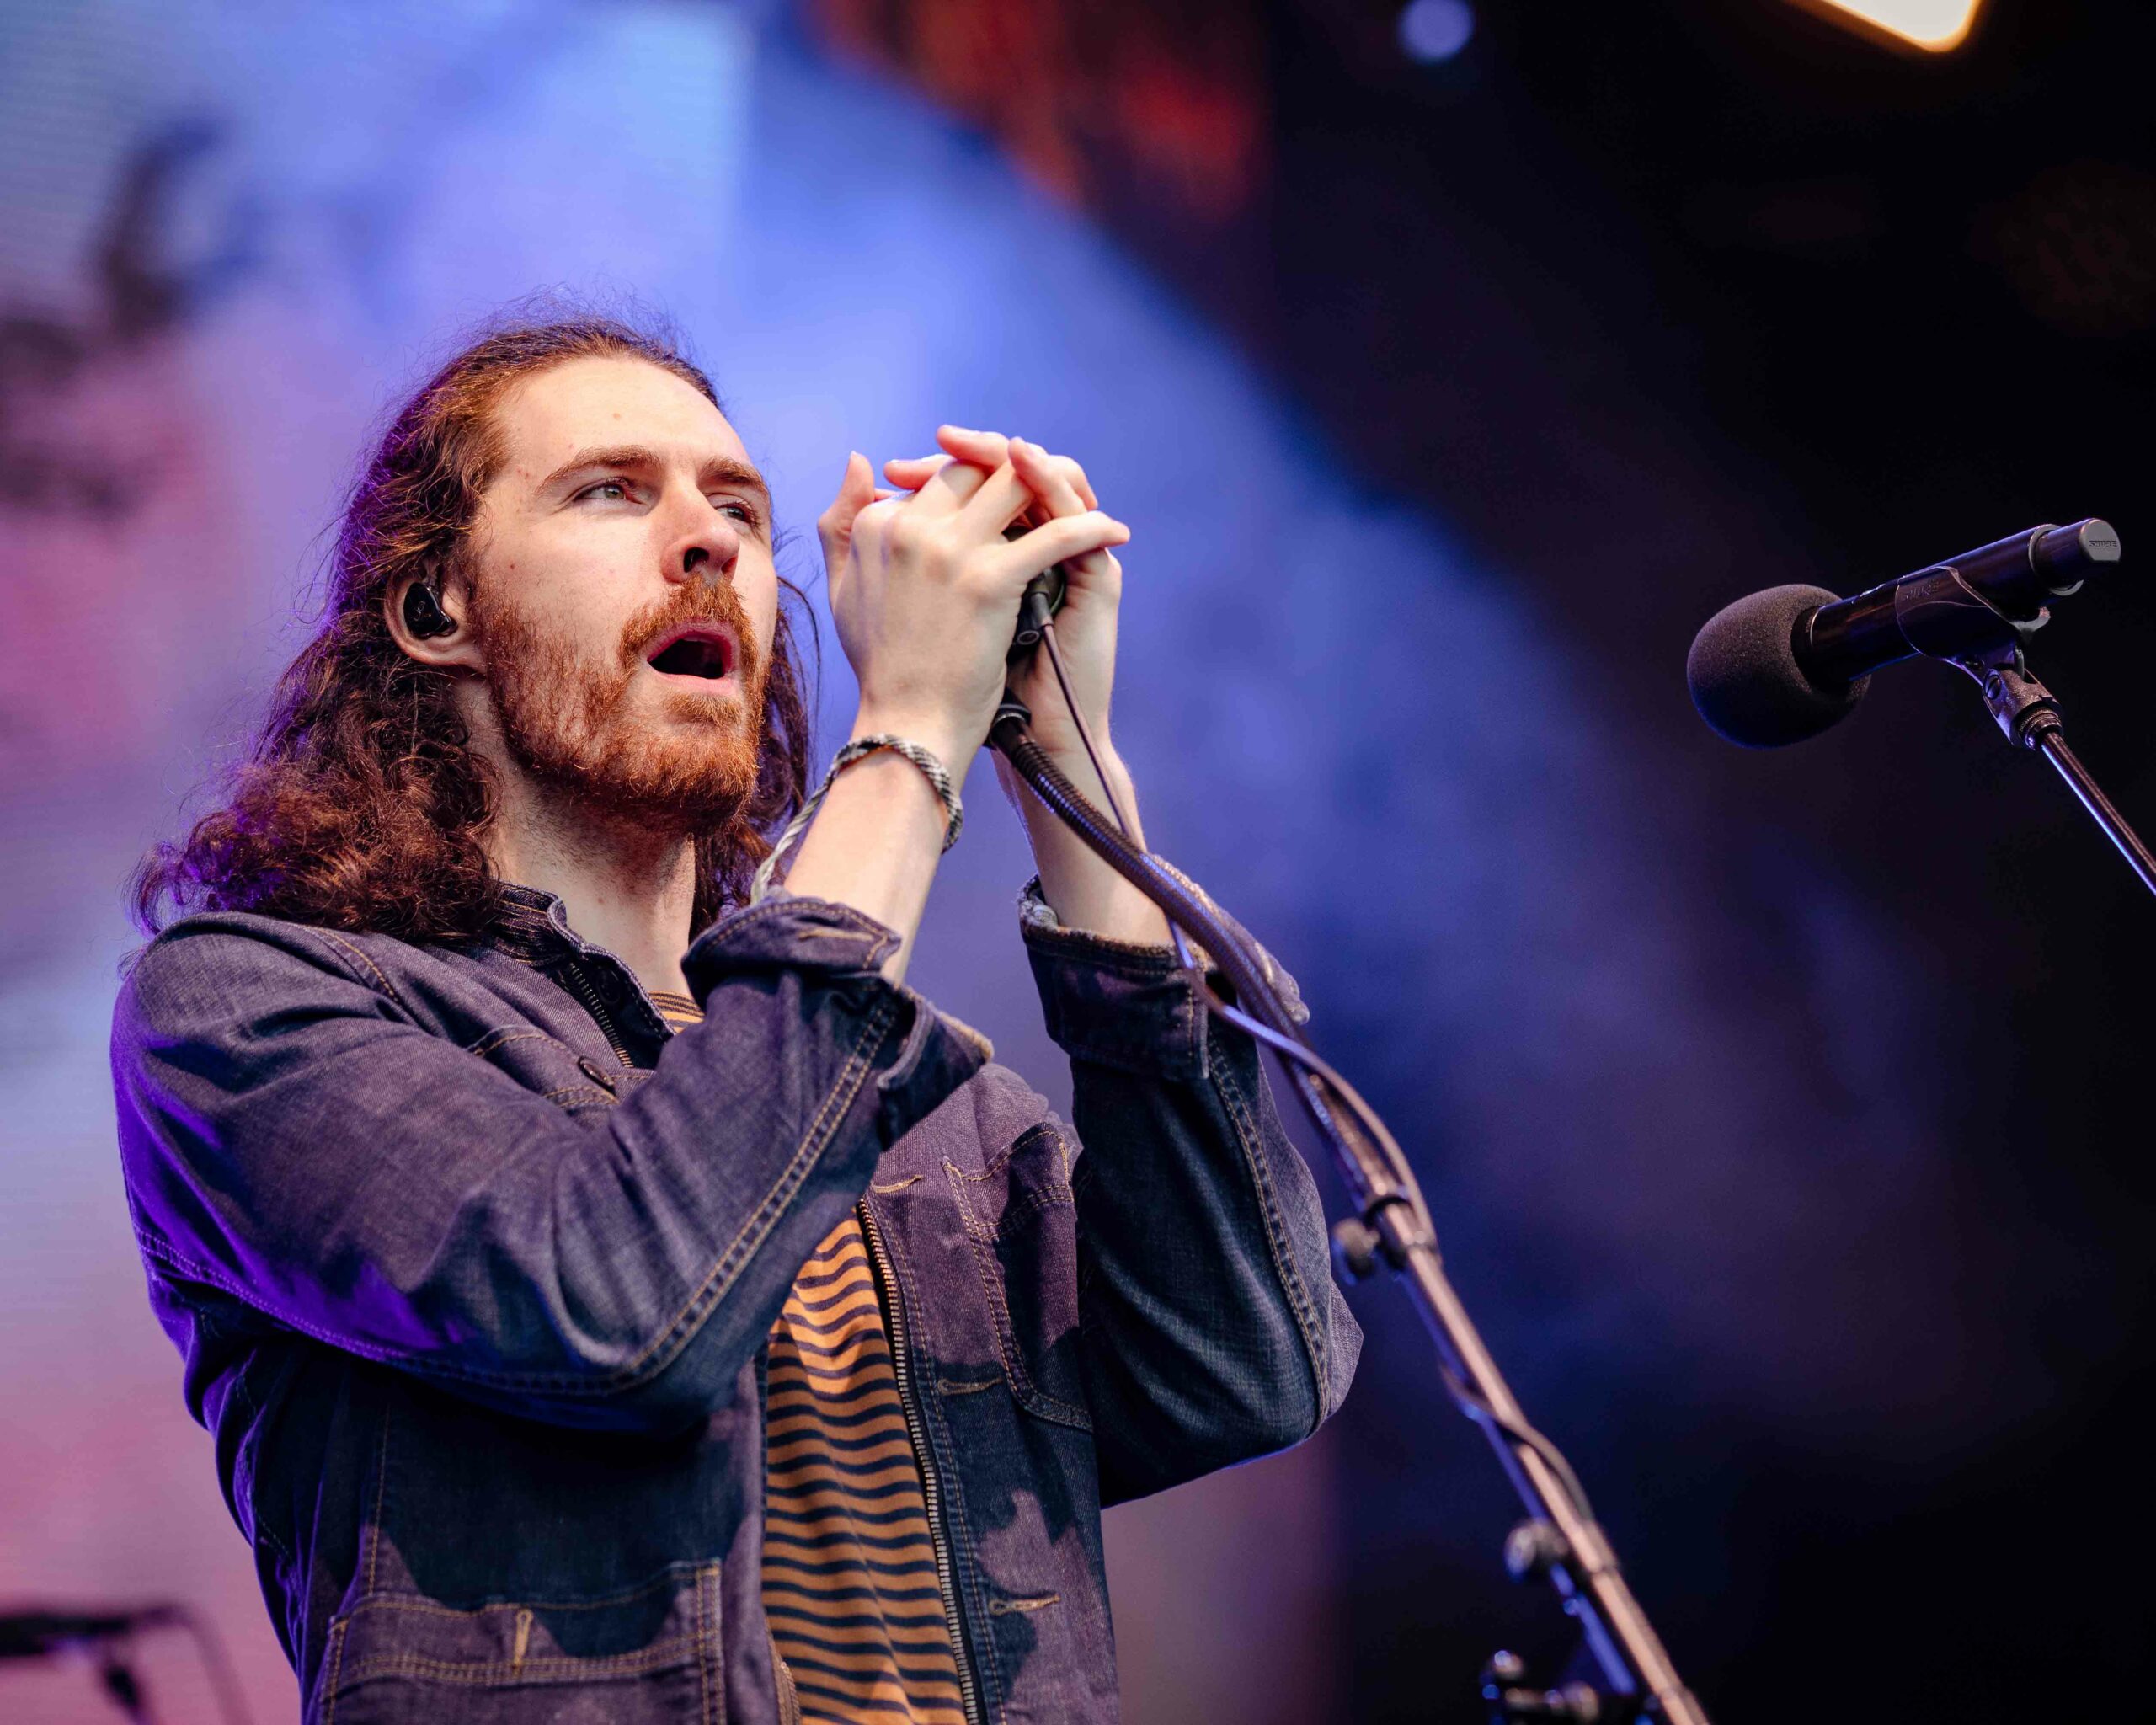 Hozier live at the Piece Hall by Mikee Downes